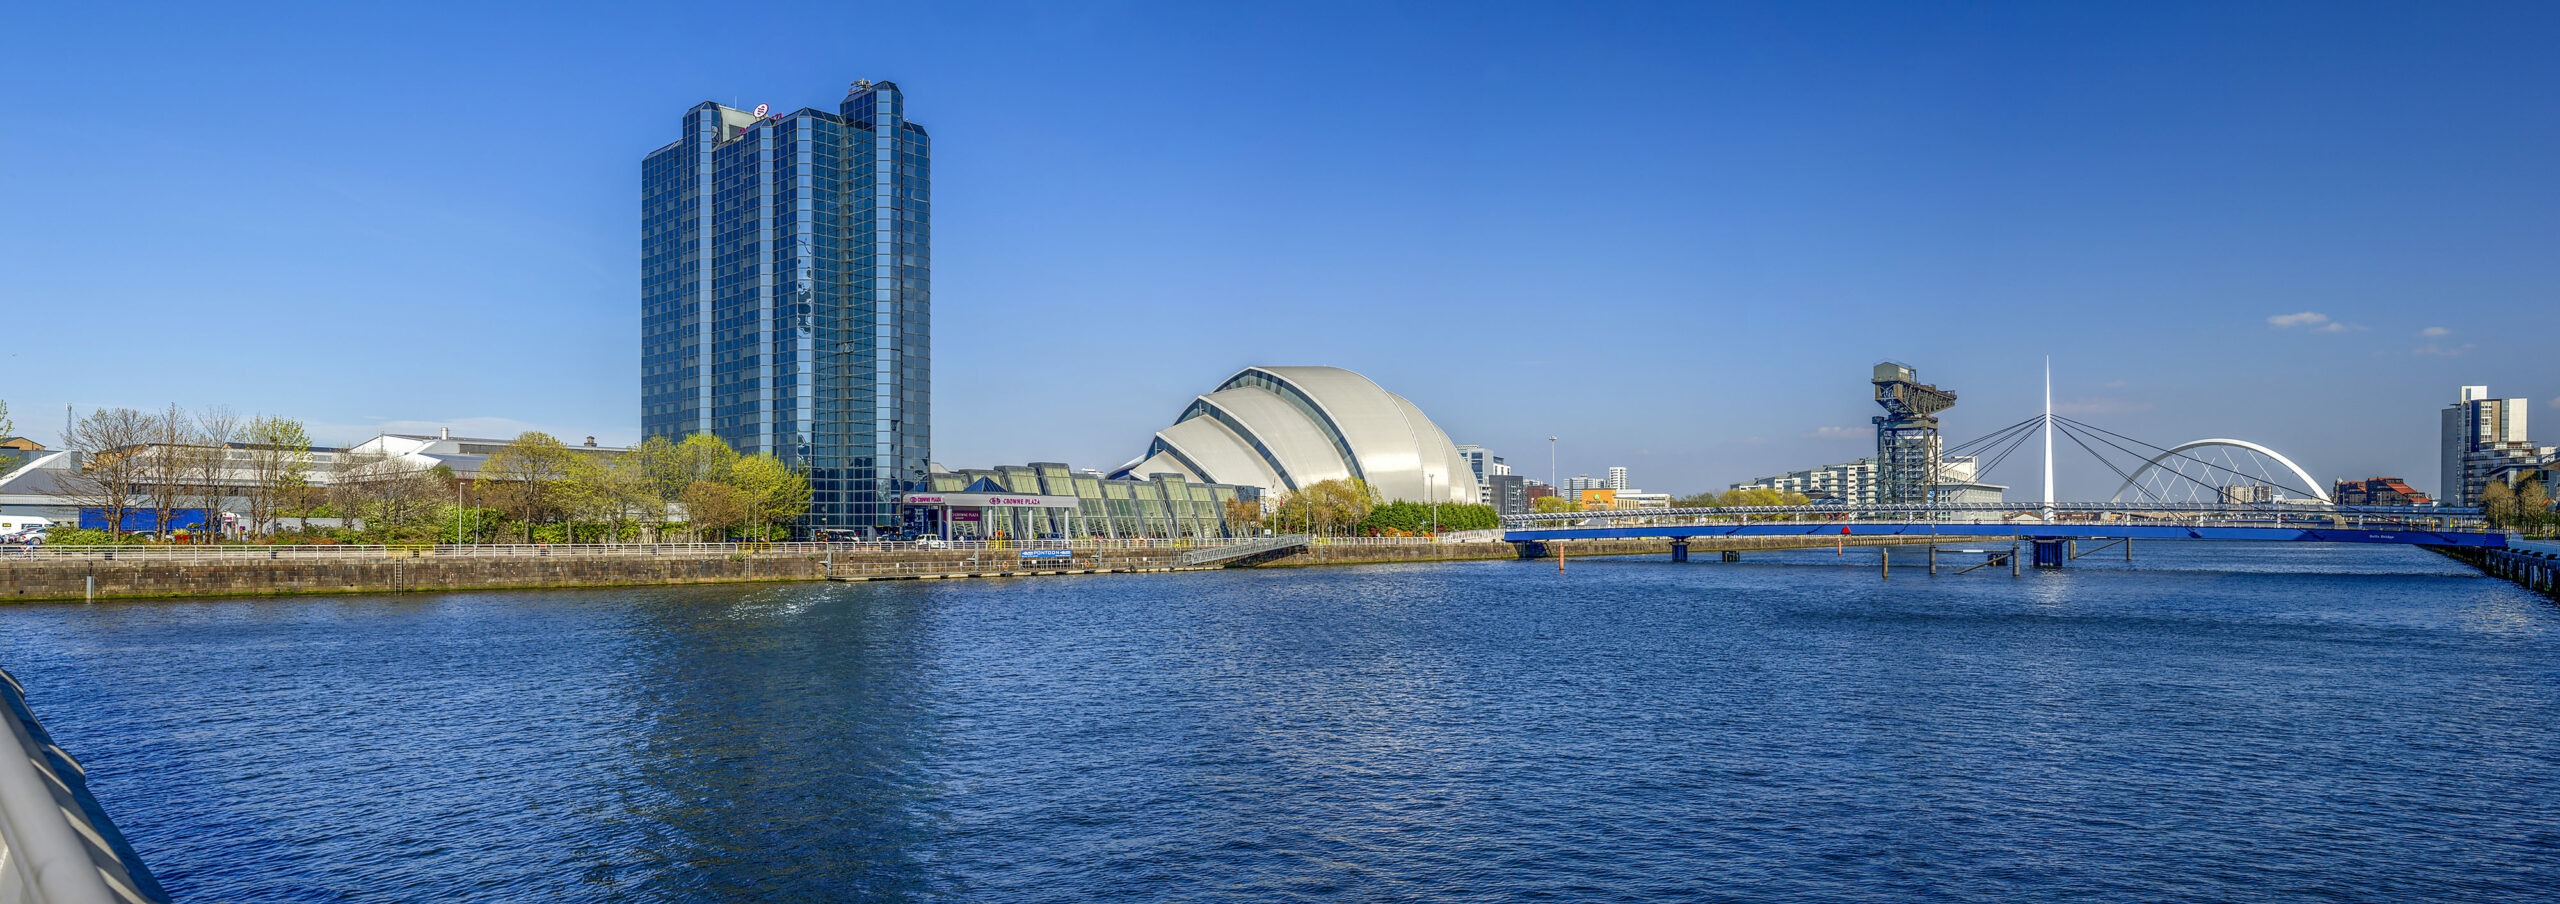 RIVER CLYDE PANORAMIC CROWNE PLAZZA HOTEL ARMADILLO AND CLYDE ARC BRIDGE